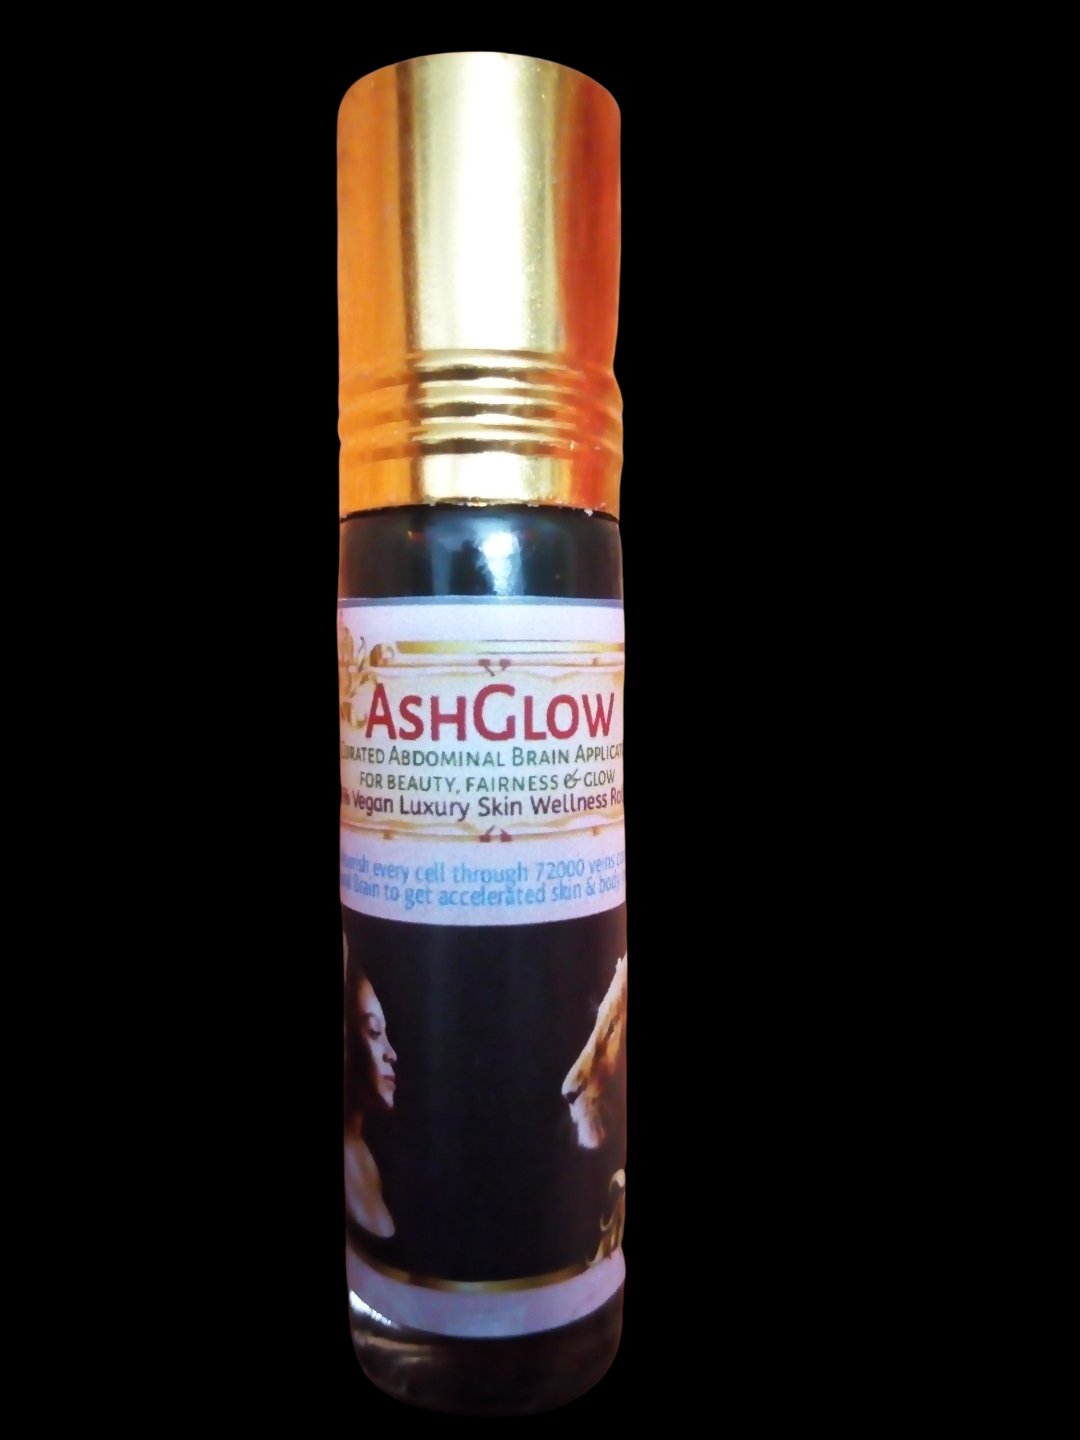 DLS Ashglow:Curated Abdominal Brain Applicator For Beauty Fairness & Glow - 8 ML